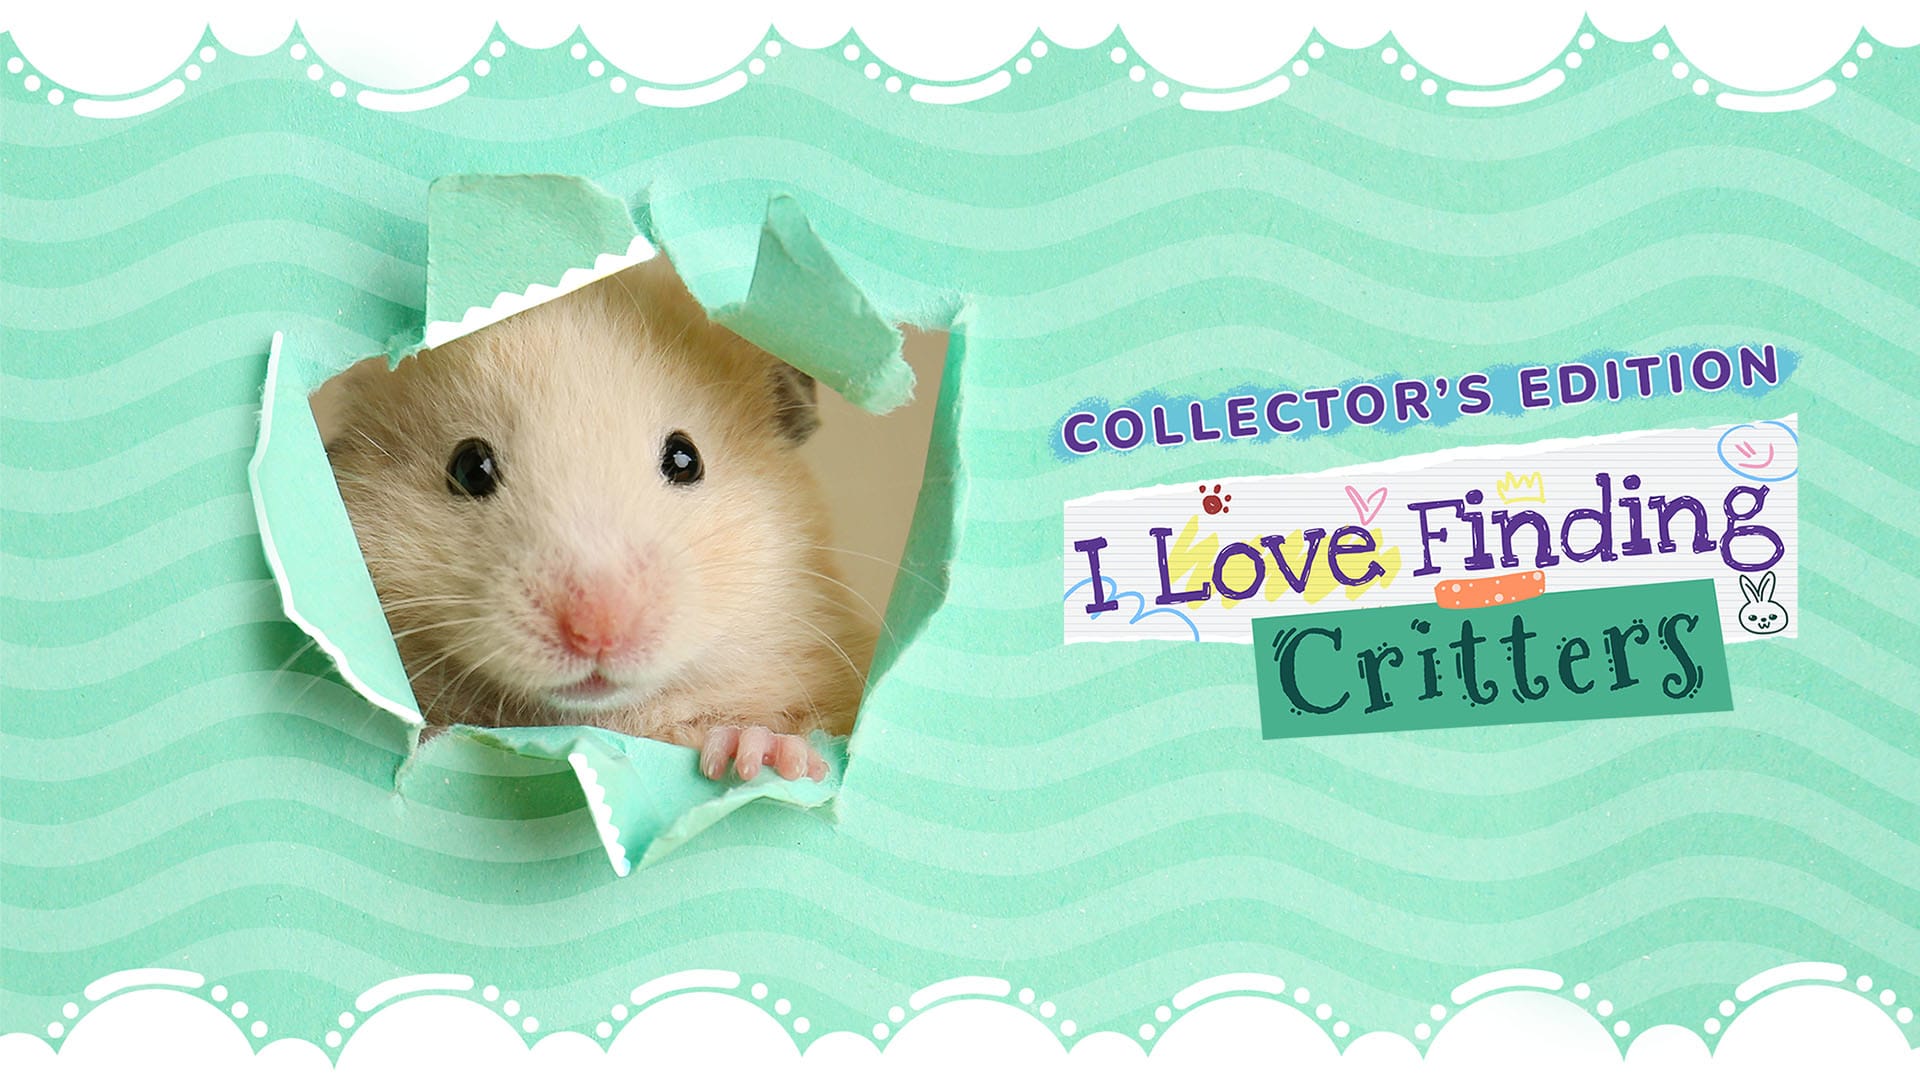 I Love Finding Critters! - Collector's Edition